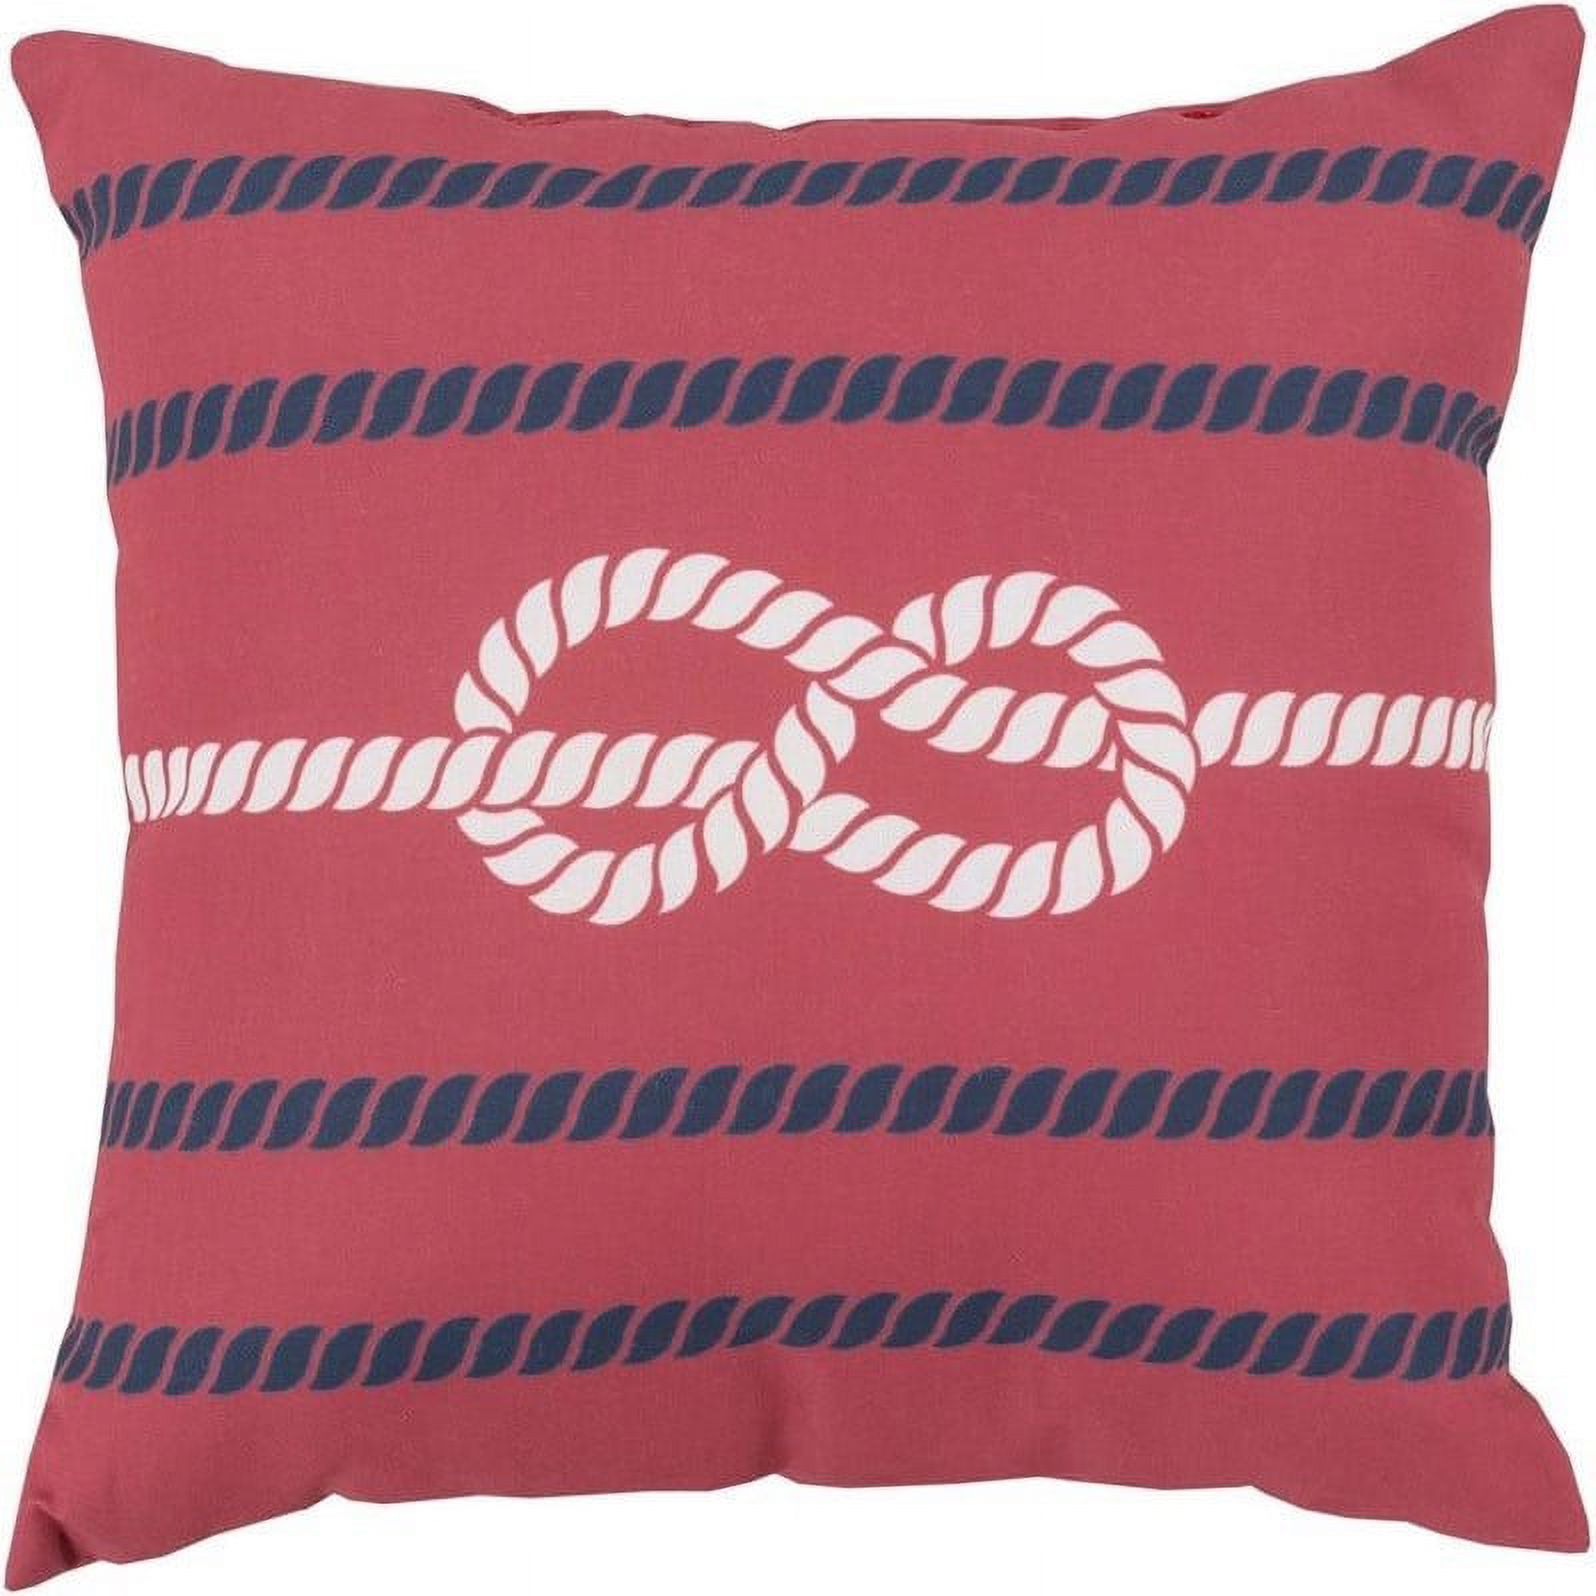 Surya Rain Poly Fill 26" Square Pillow in Cobalt and Red - image 1 of 2